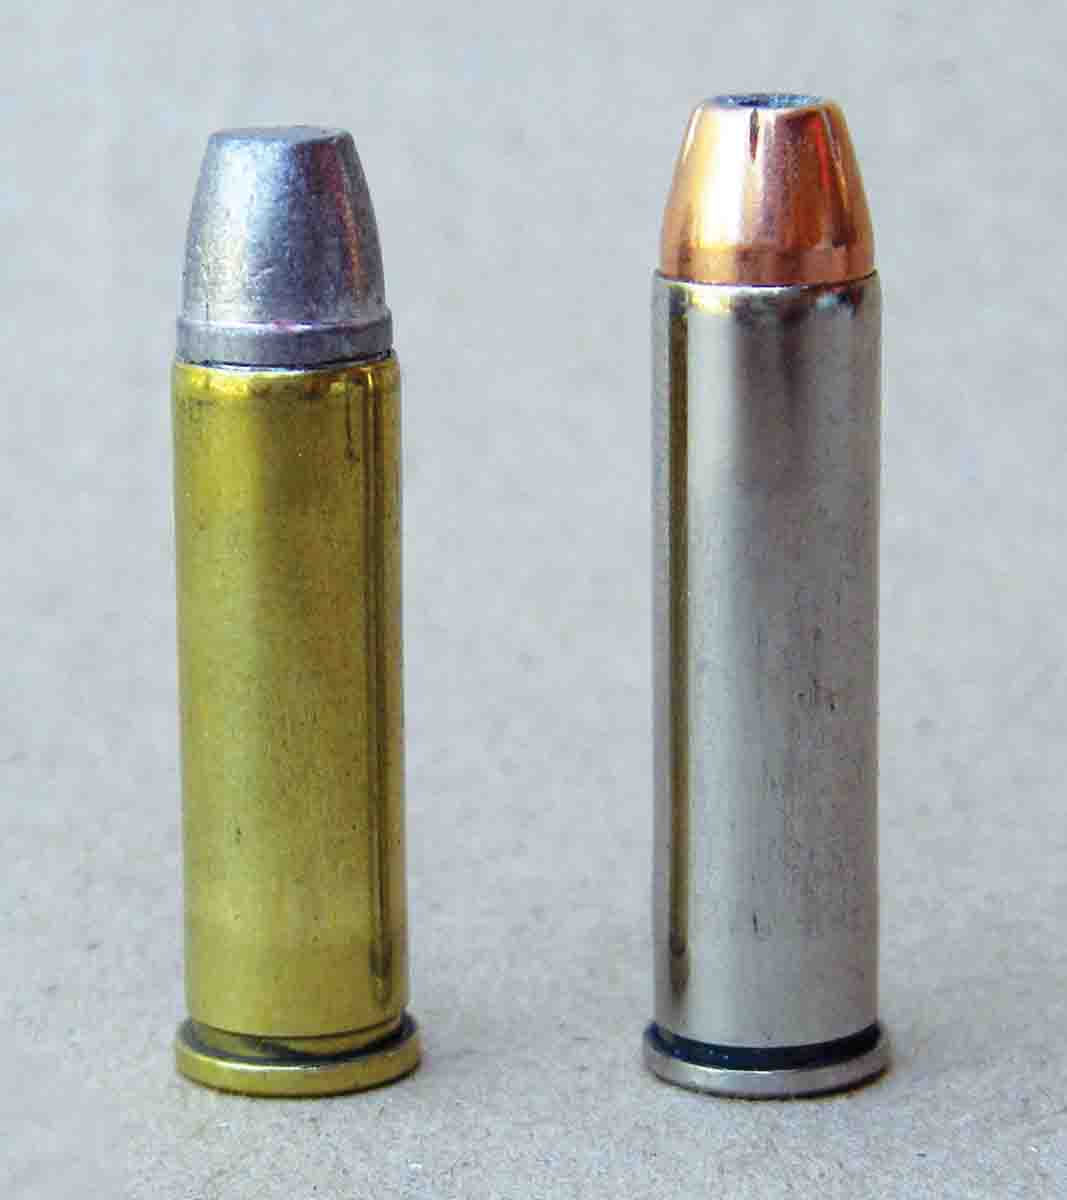 The .327 Federal Magnum (right) is the offspring of the .32 H&R Magnum (left).